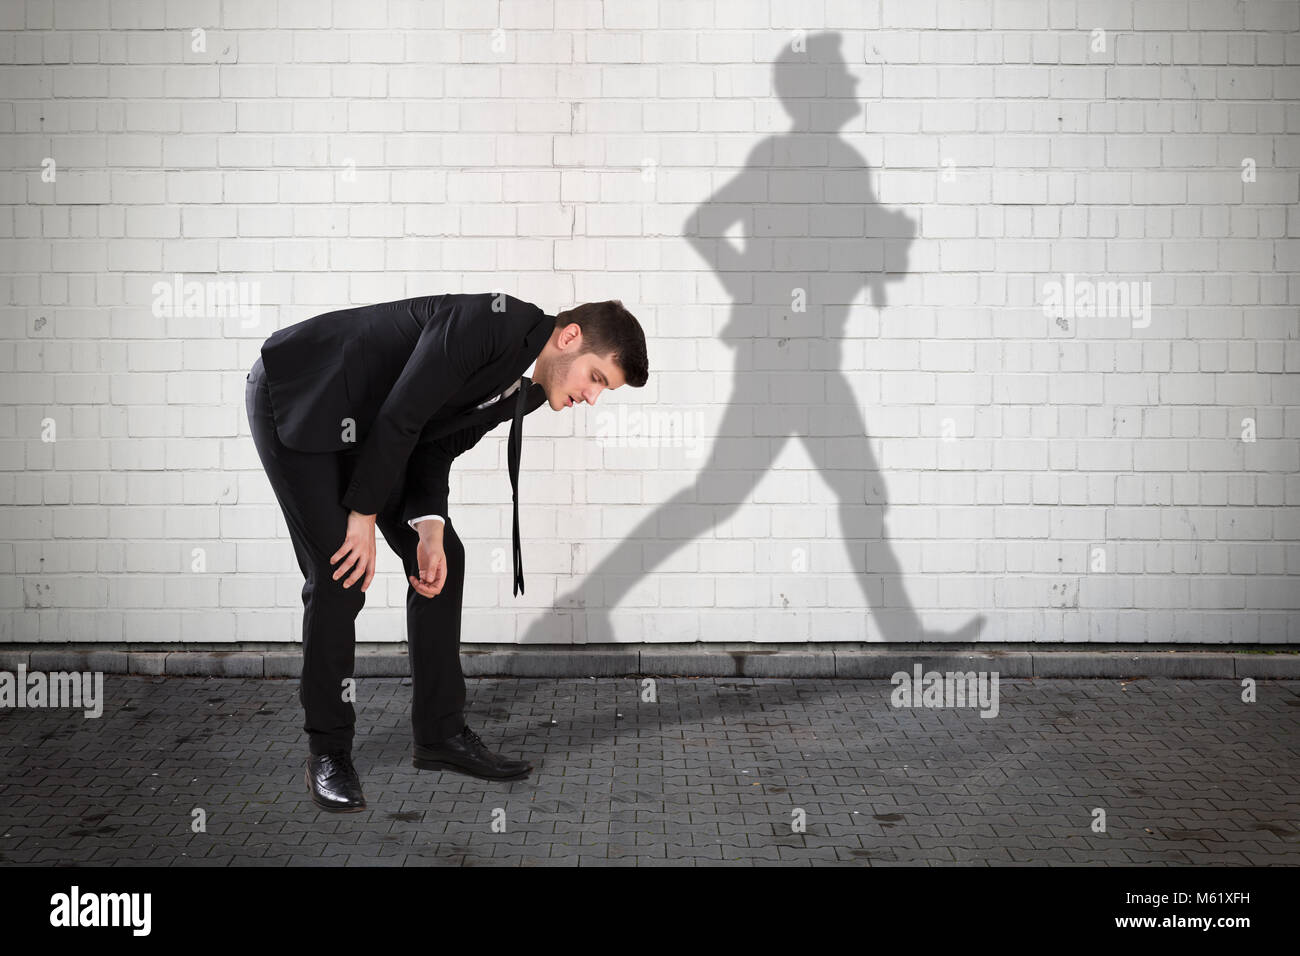 Young Tired Businessman With Shadow Of Man Running Formed On Wall Stock Photo